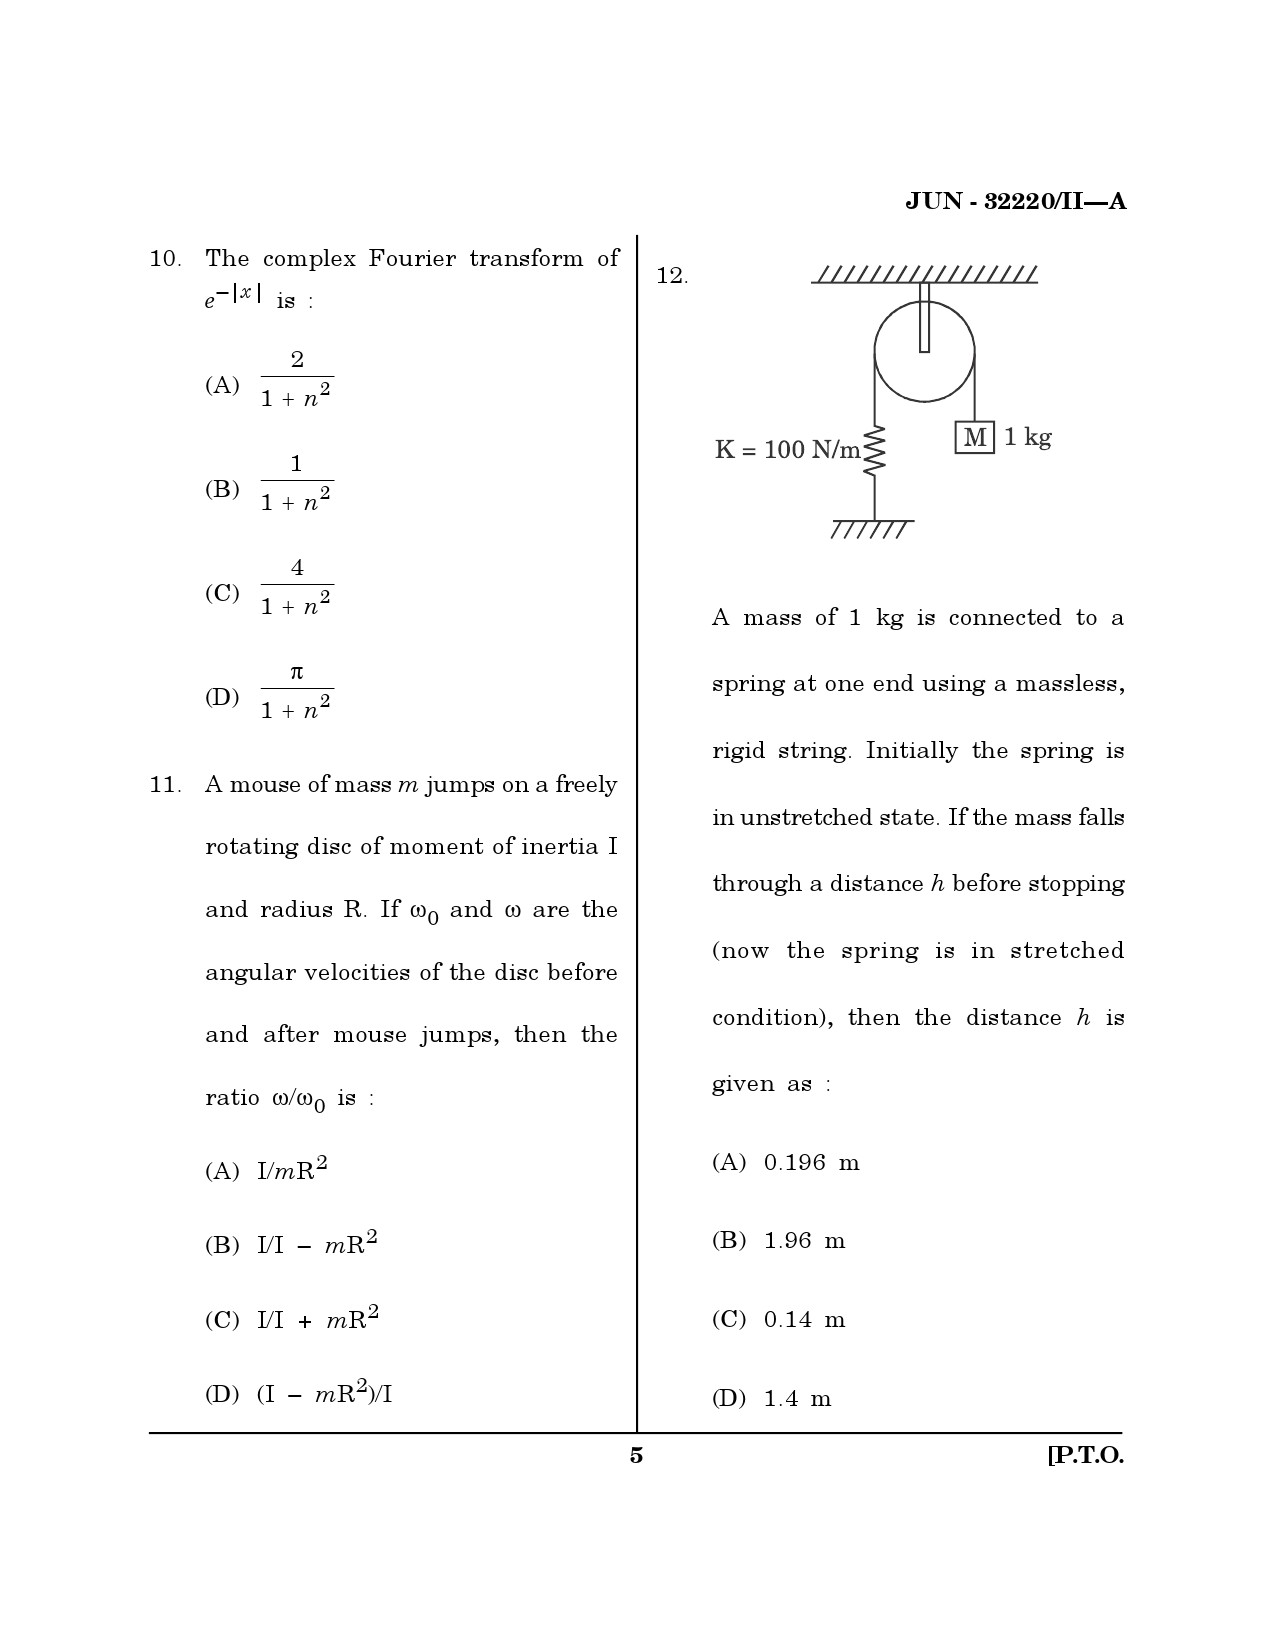 Maharashtra SET Physical Science Question Paper II June 2020 4